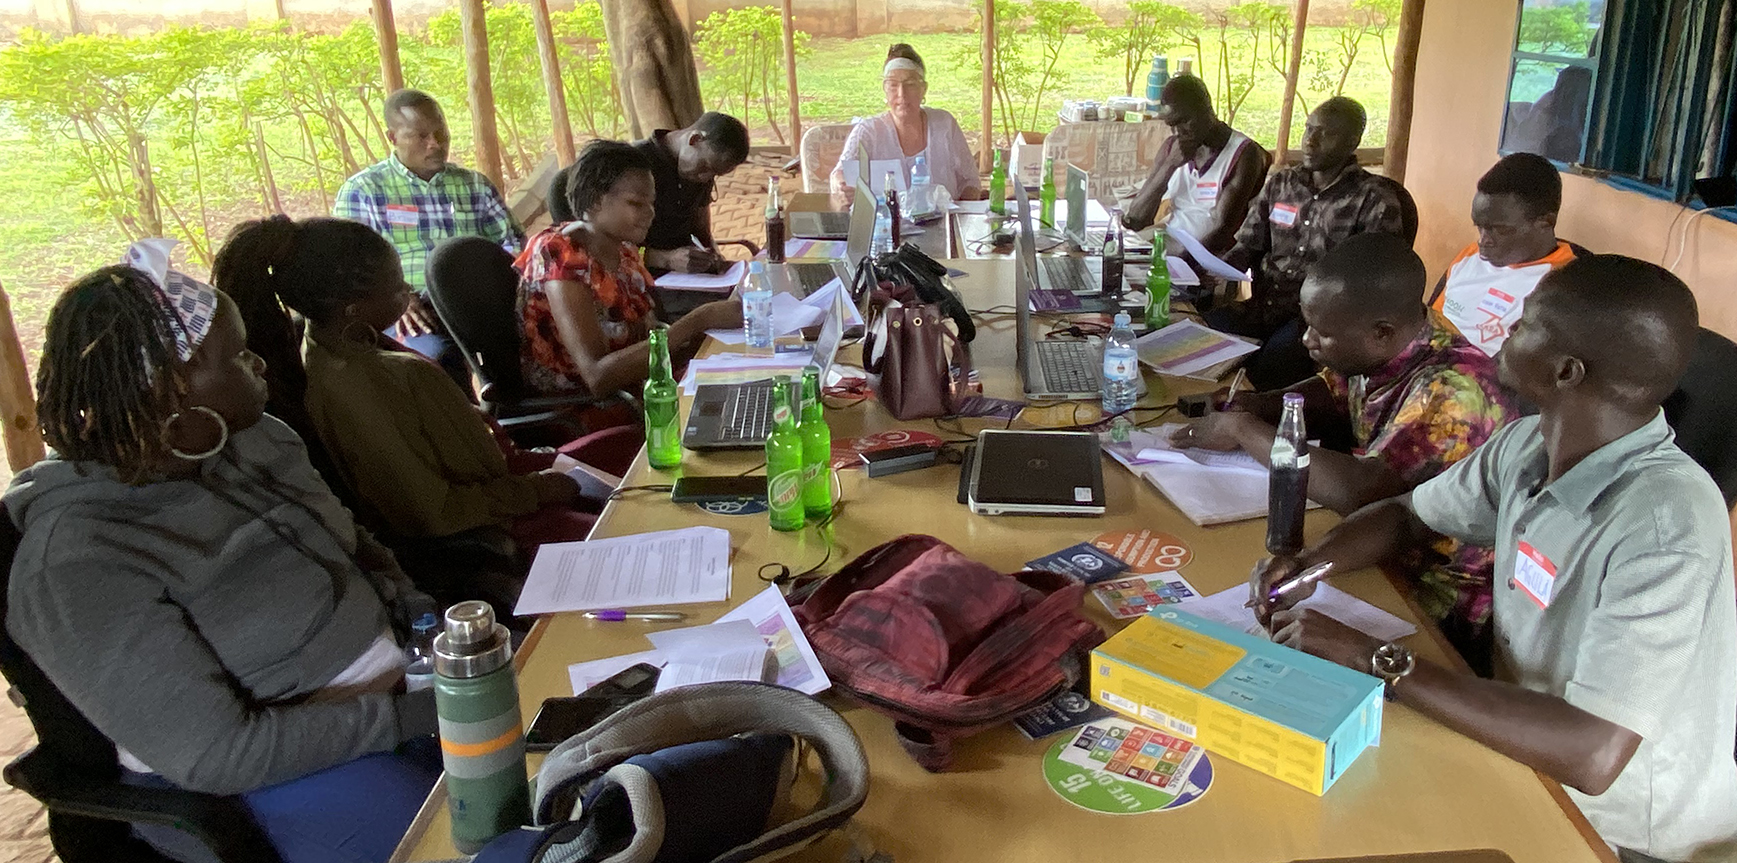 Gertrude working with members of the CPA team to plan lessons and activities in the Gender Equity-Wash and other 2022-23 Words Into Deeds programs.